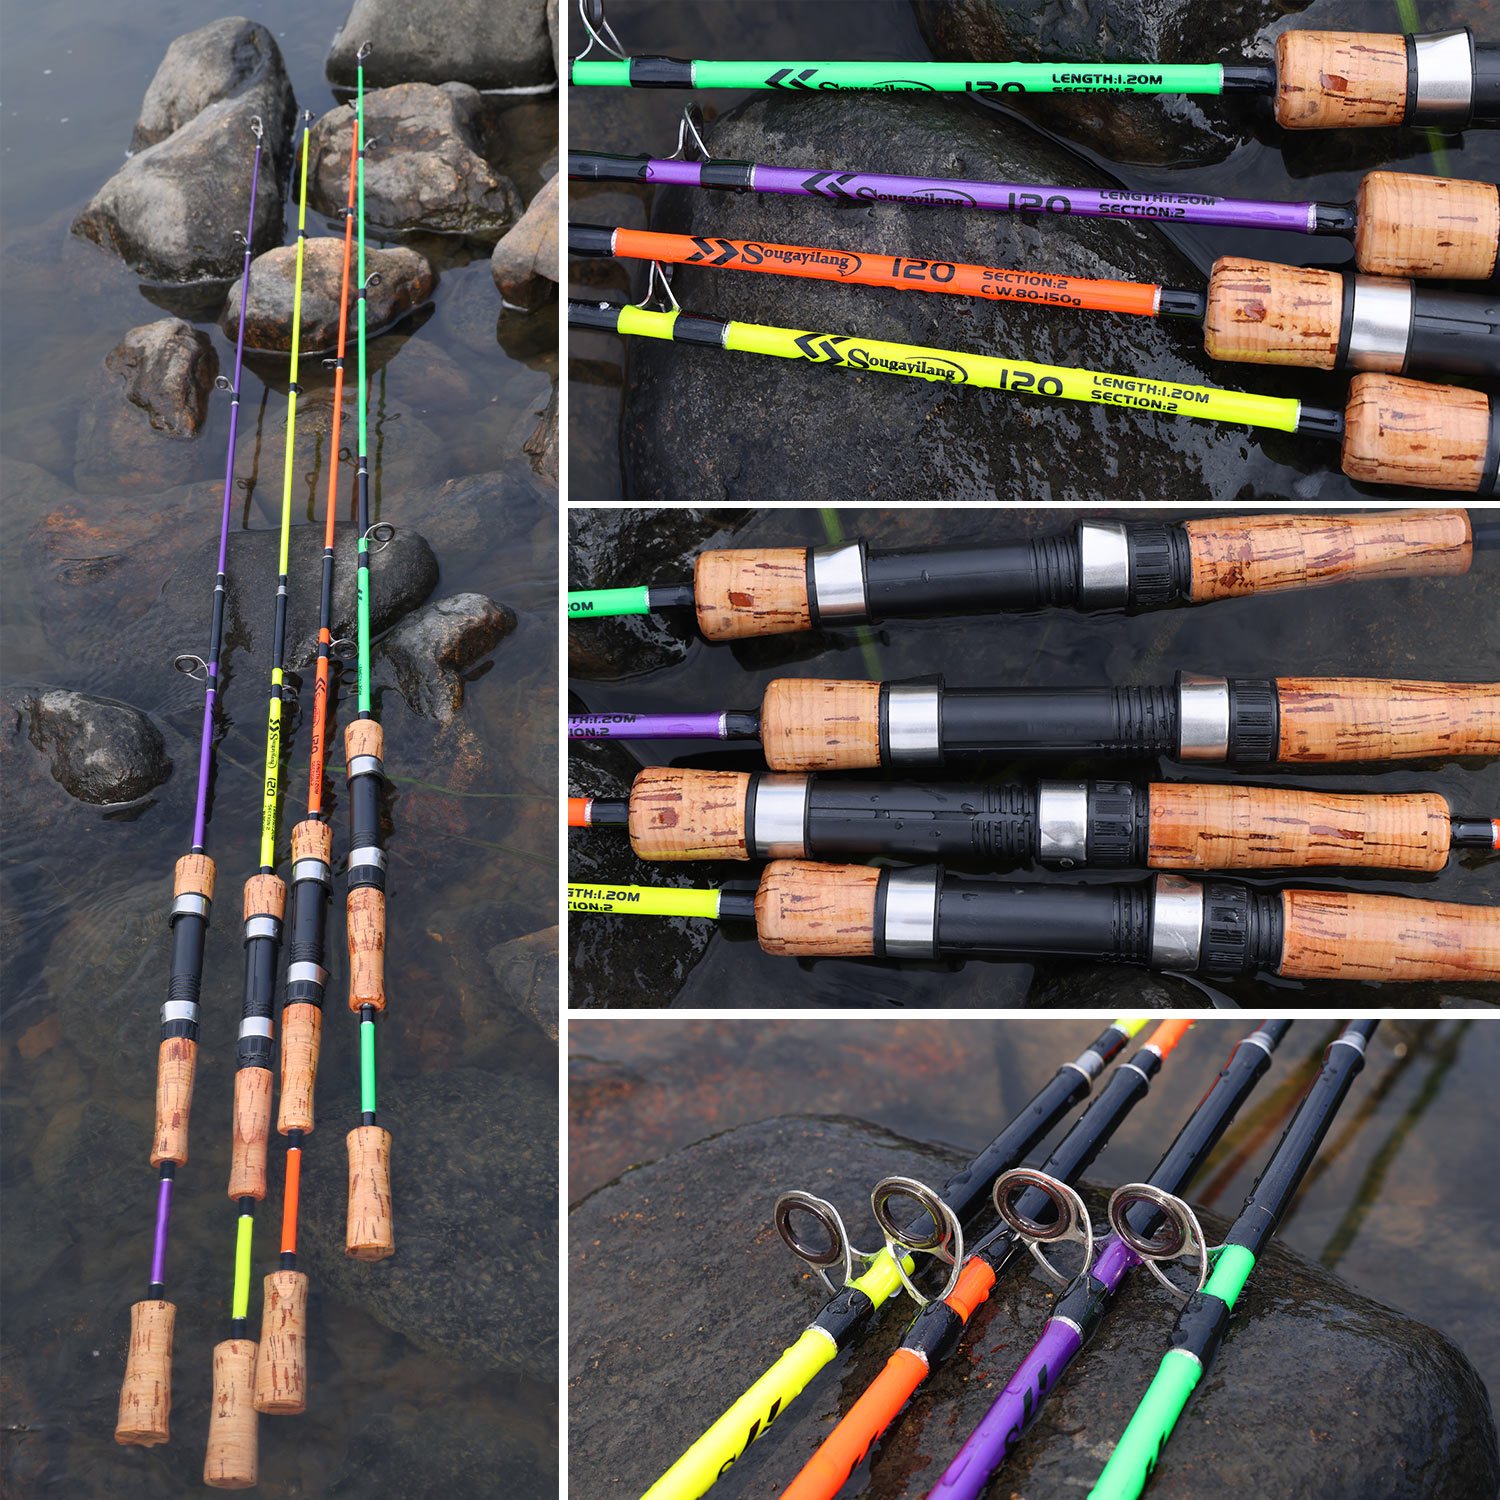 Super Solid Glass Fiber Unbreakable Spinning Fishing Rod 2 piece fishing rod